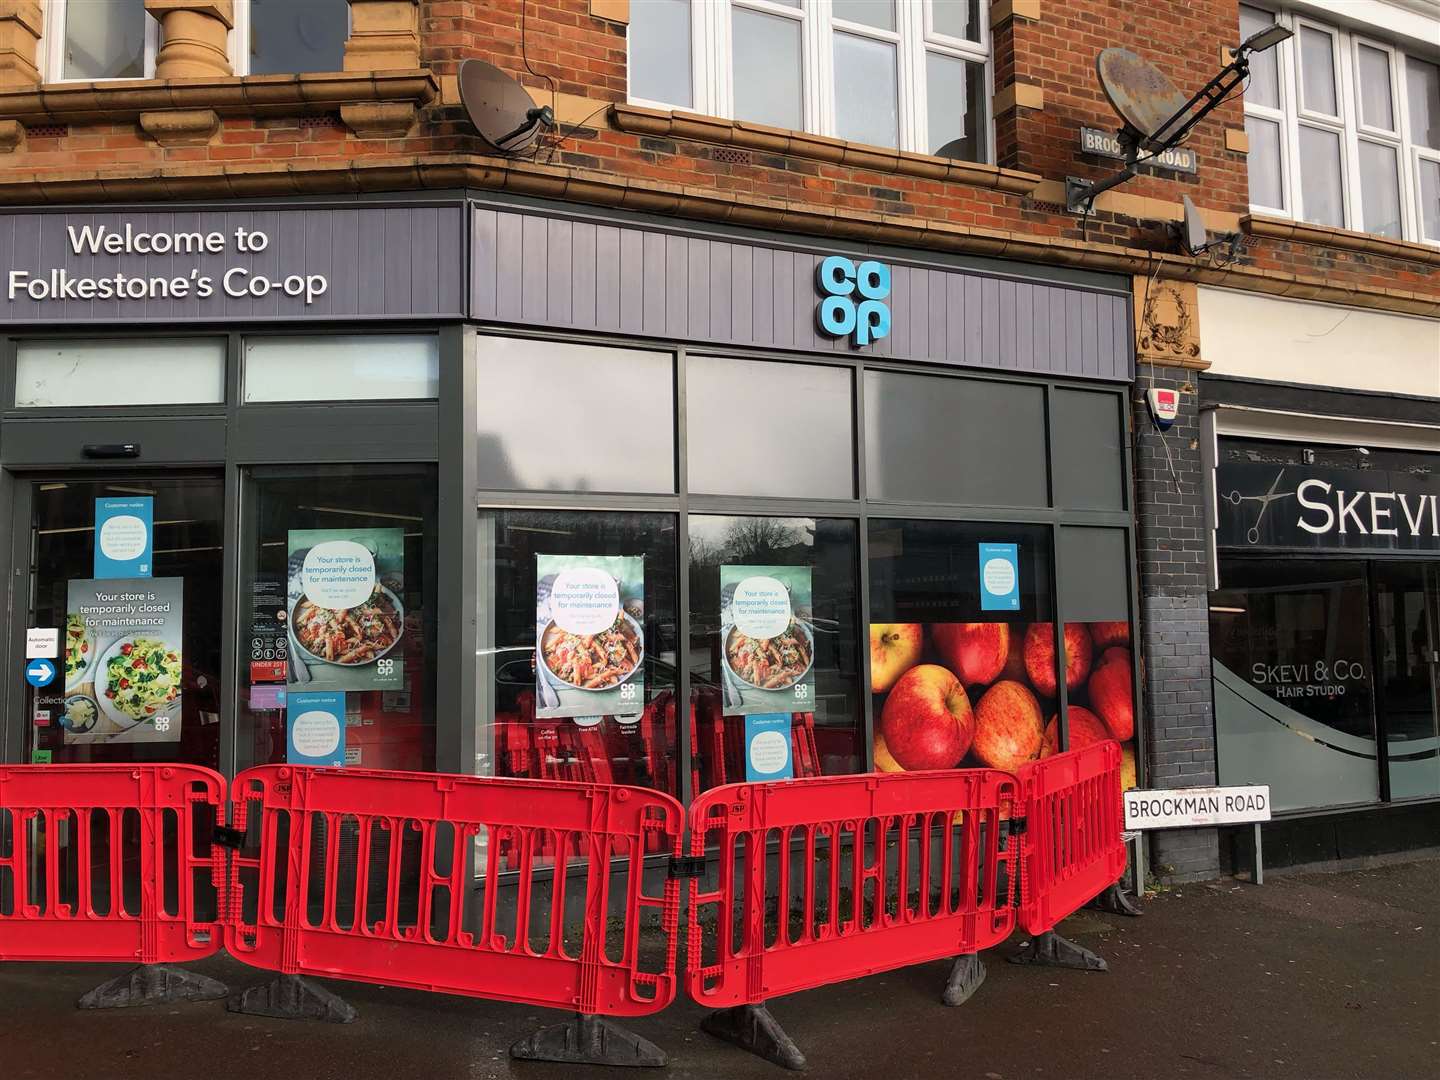 The store near Folkestone central has now been closed for almost three weeks